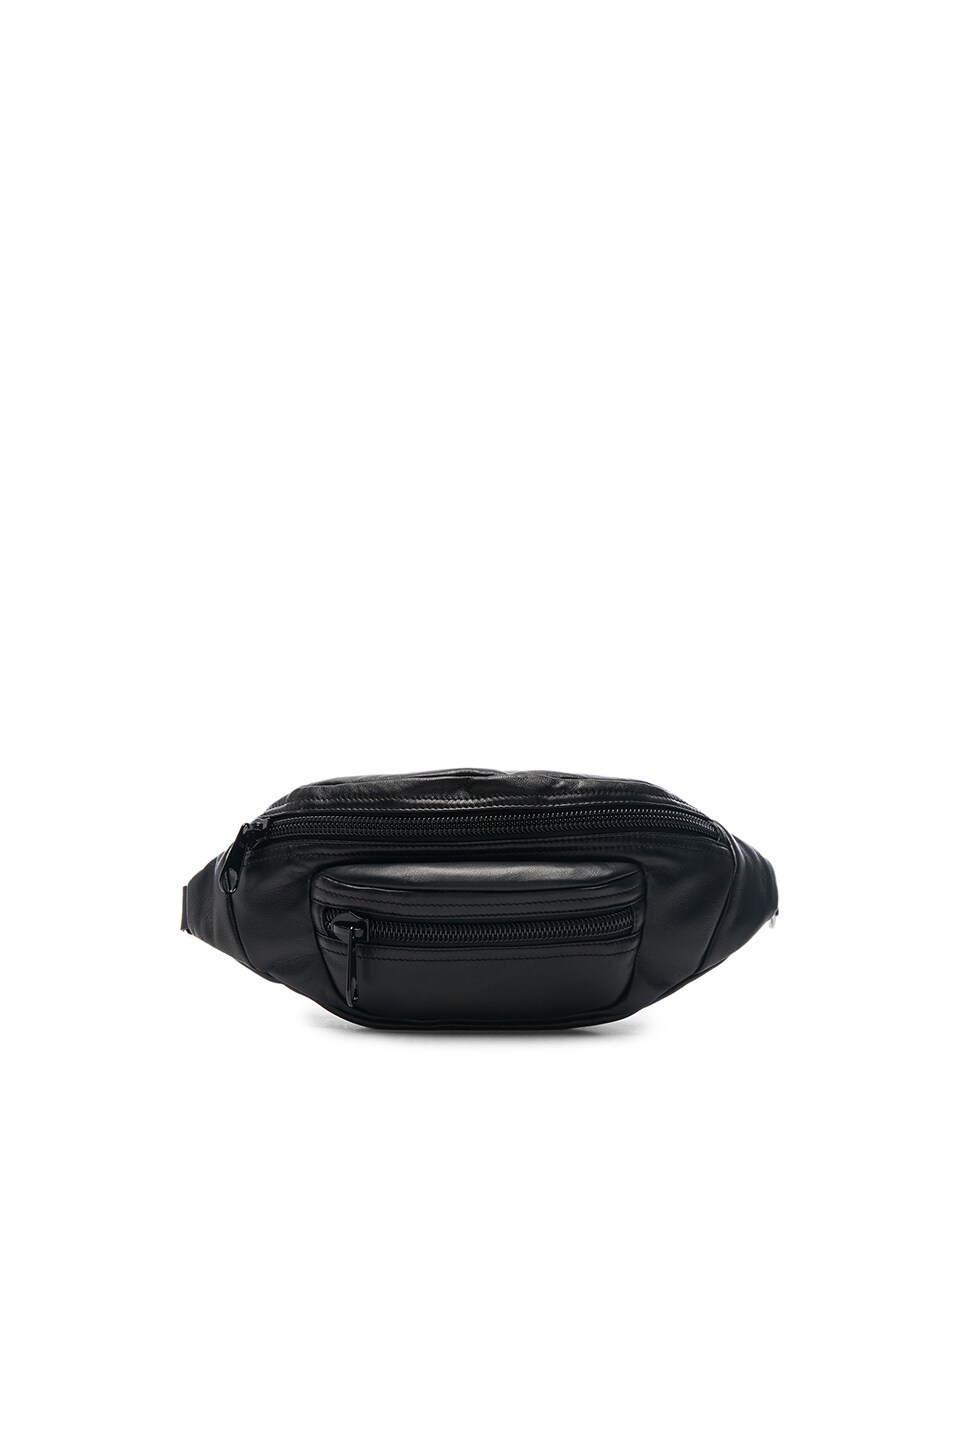 Image 1 of Alexander Wang Primary Fanny Pack in Black